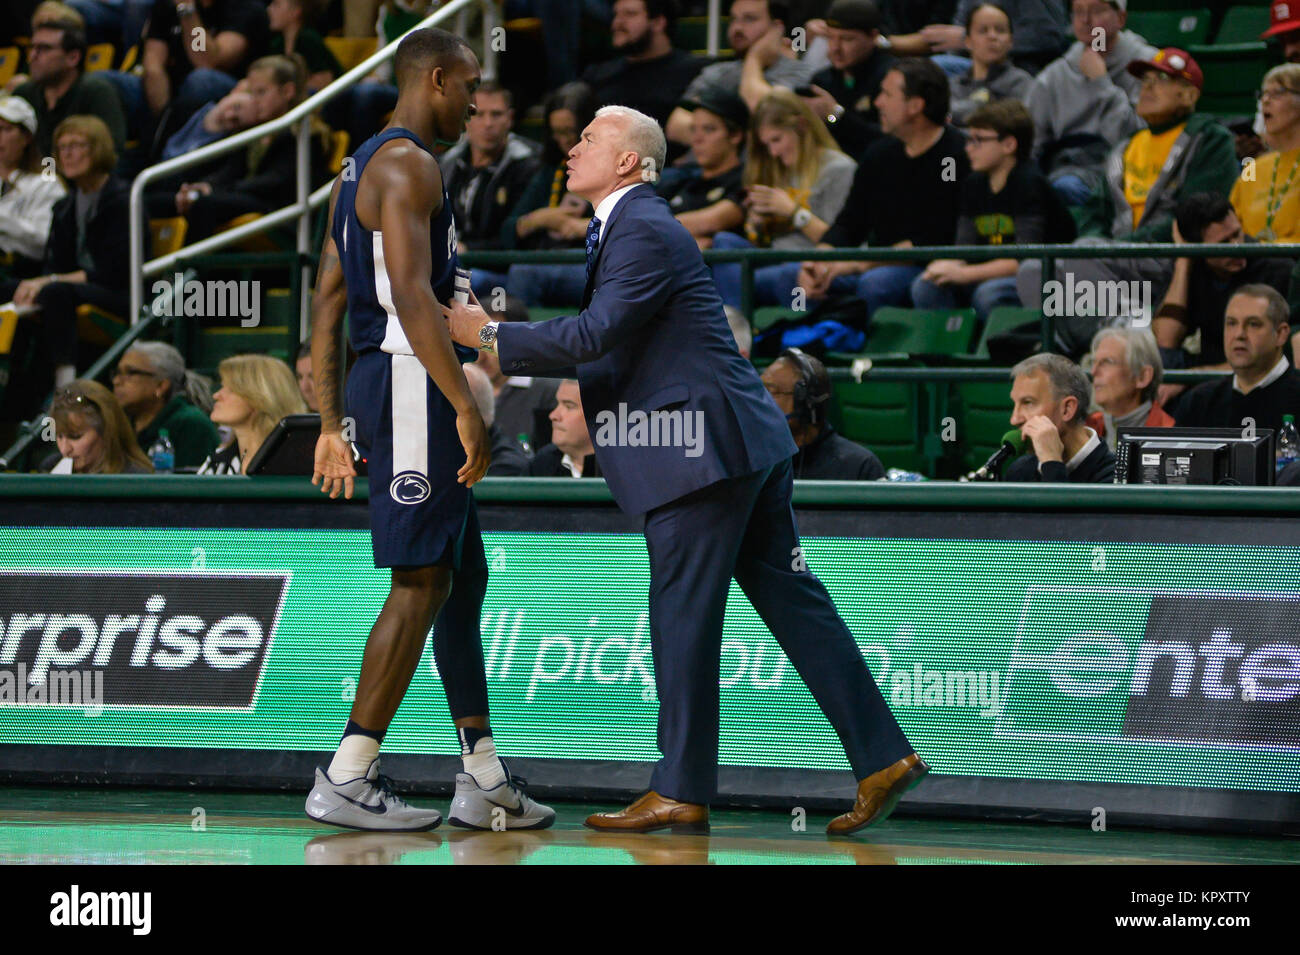 Fairfax, Virginia, USA. 17th Dec, 2017. NAZEER BOSTICK (4) gets a talking to by Penn State Head Coach PAT CHAMBERS during the game held at EagleBank Arena in Fairfax, Virginia. Credit: Amy Sanderson/ZUMA Wire/Alamy Live News Stock Photo